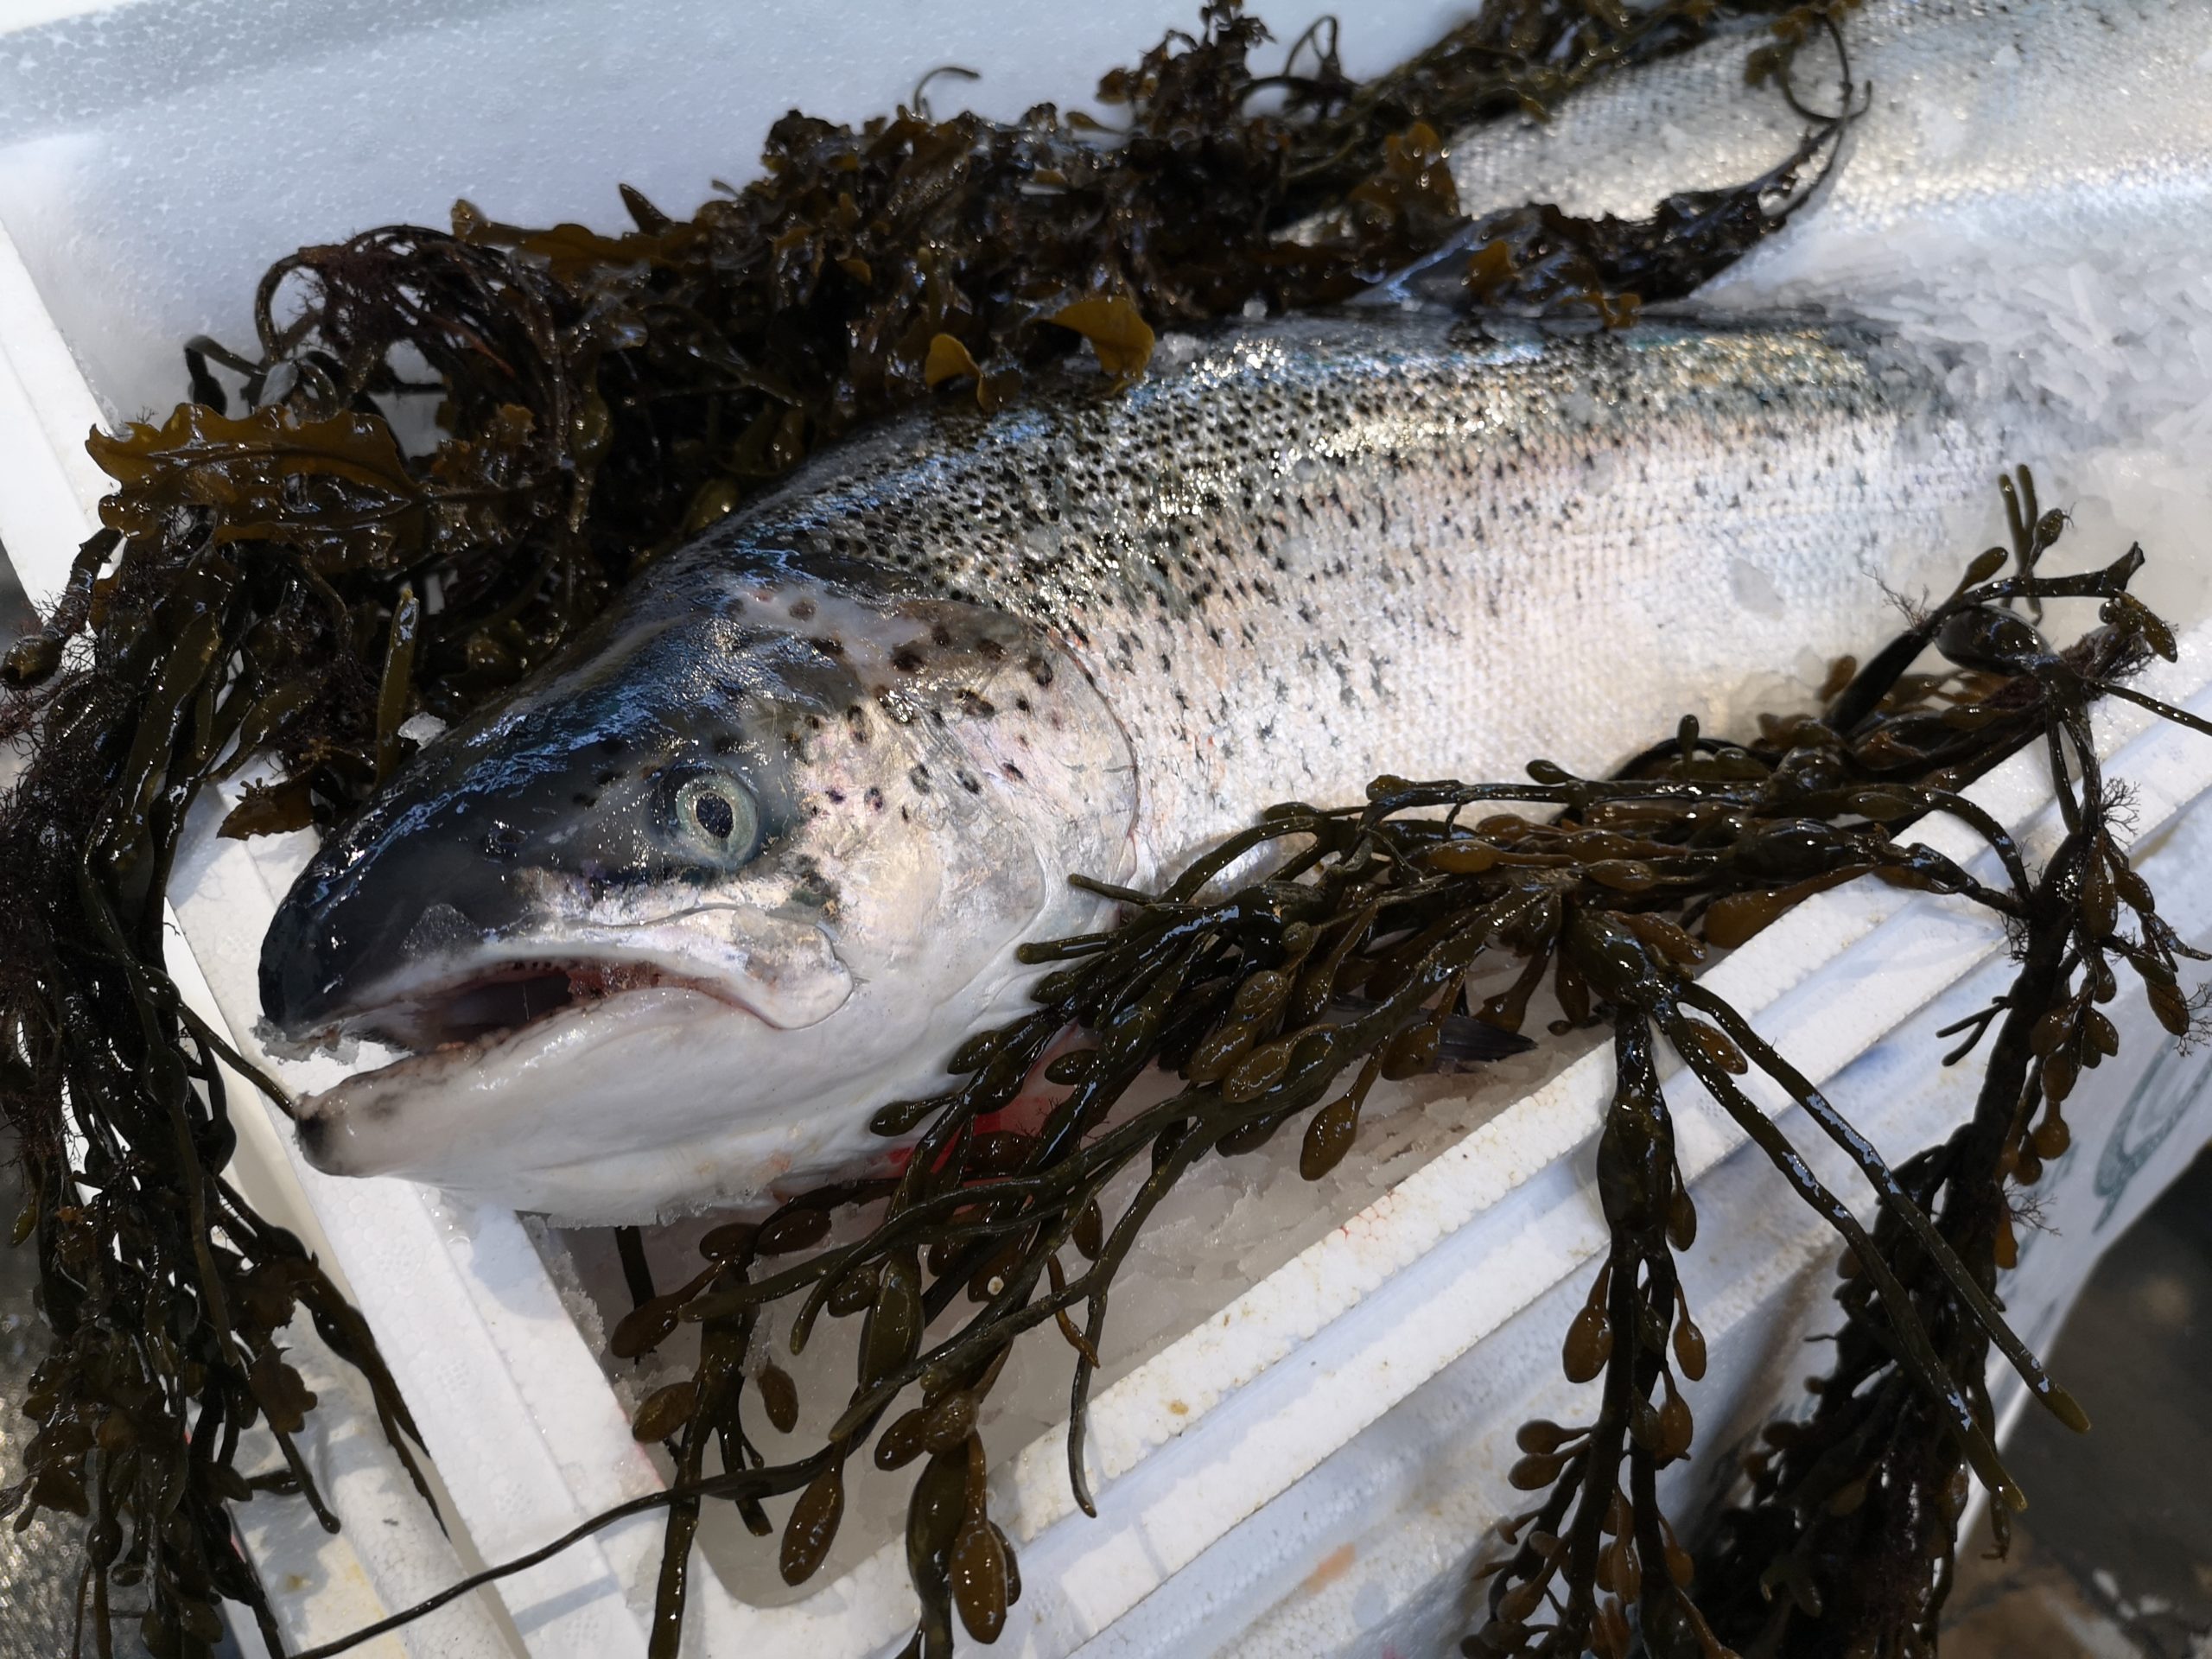 Salmon farmers are keeping fish in the water for longer as coronavirus restrictions hit markets